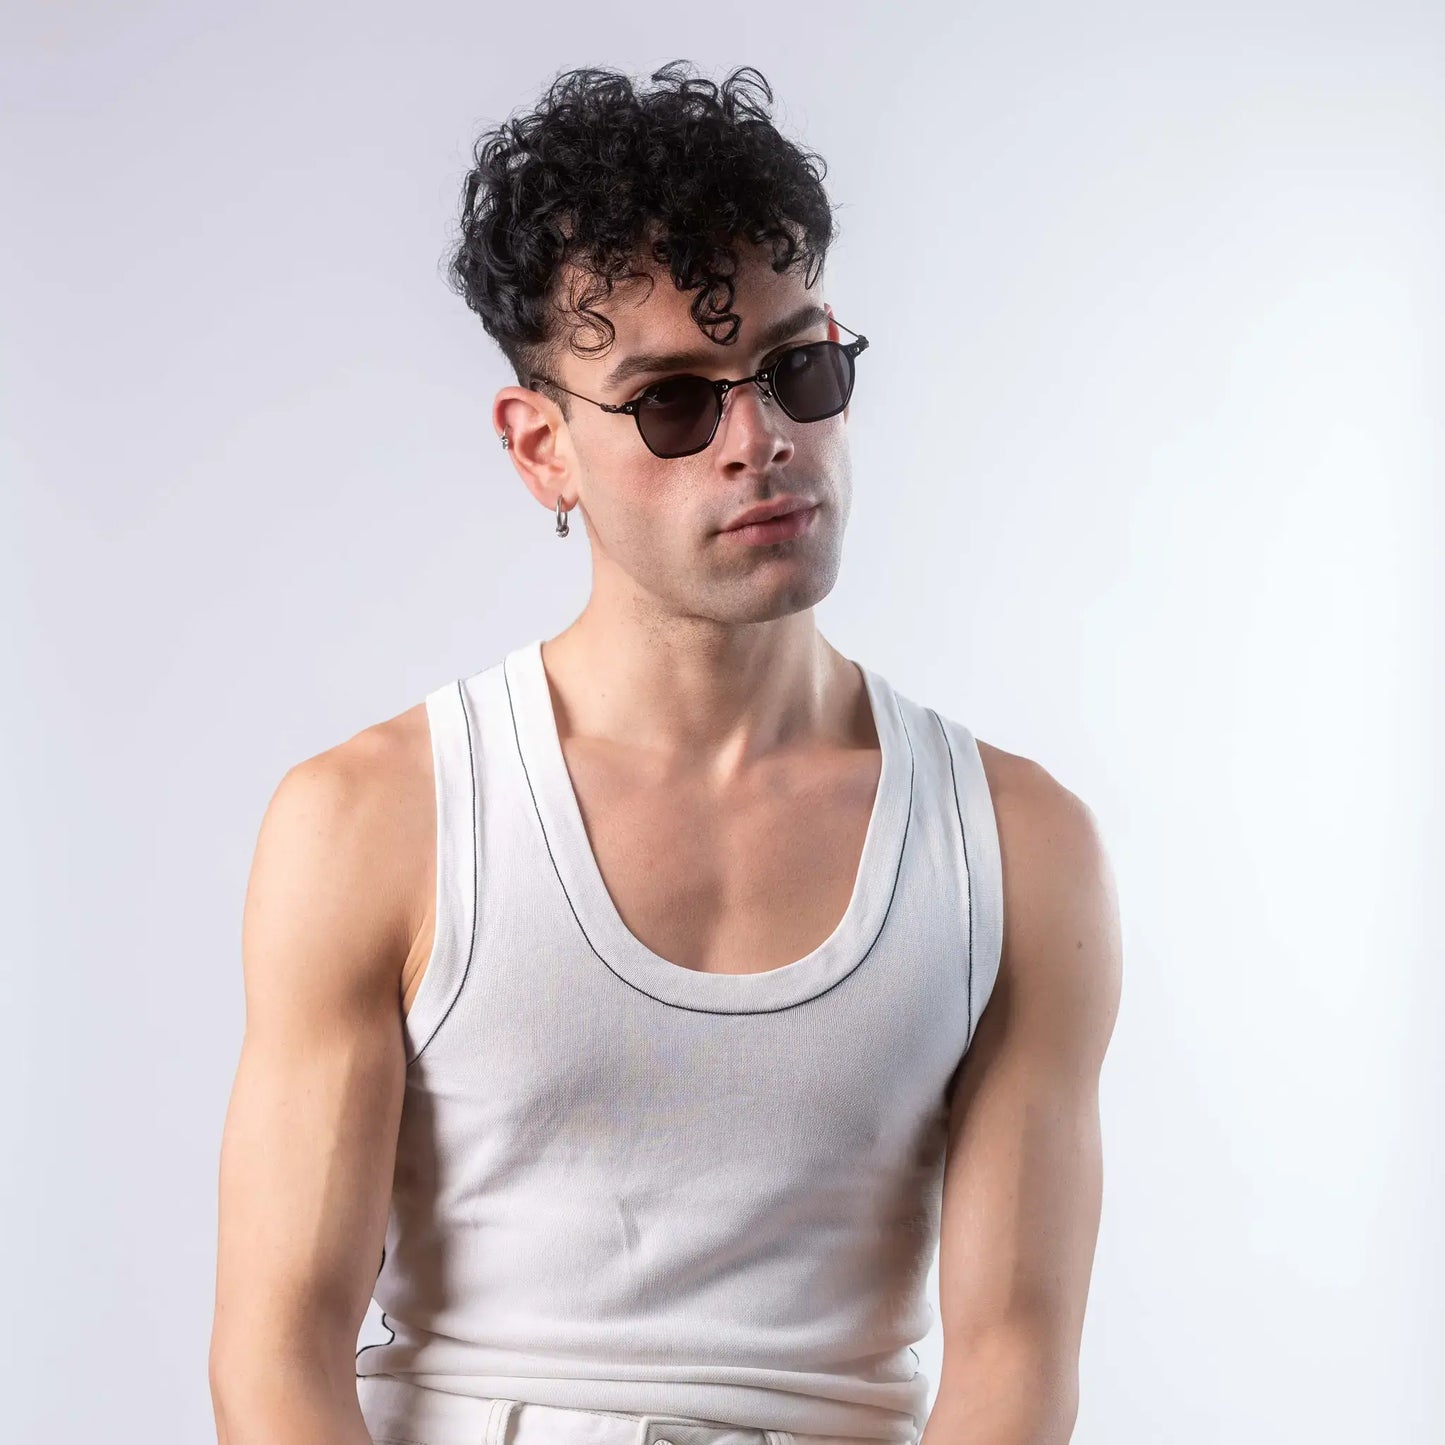 A male model wearing Exposure Sunglasses polarized sunglasses with black frames and black lenses, posing against a white background.